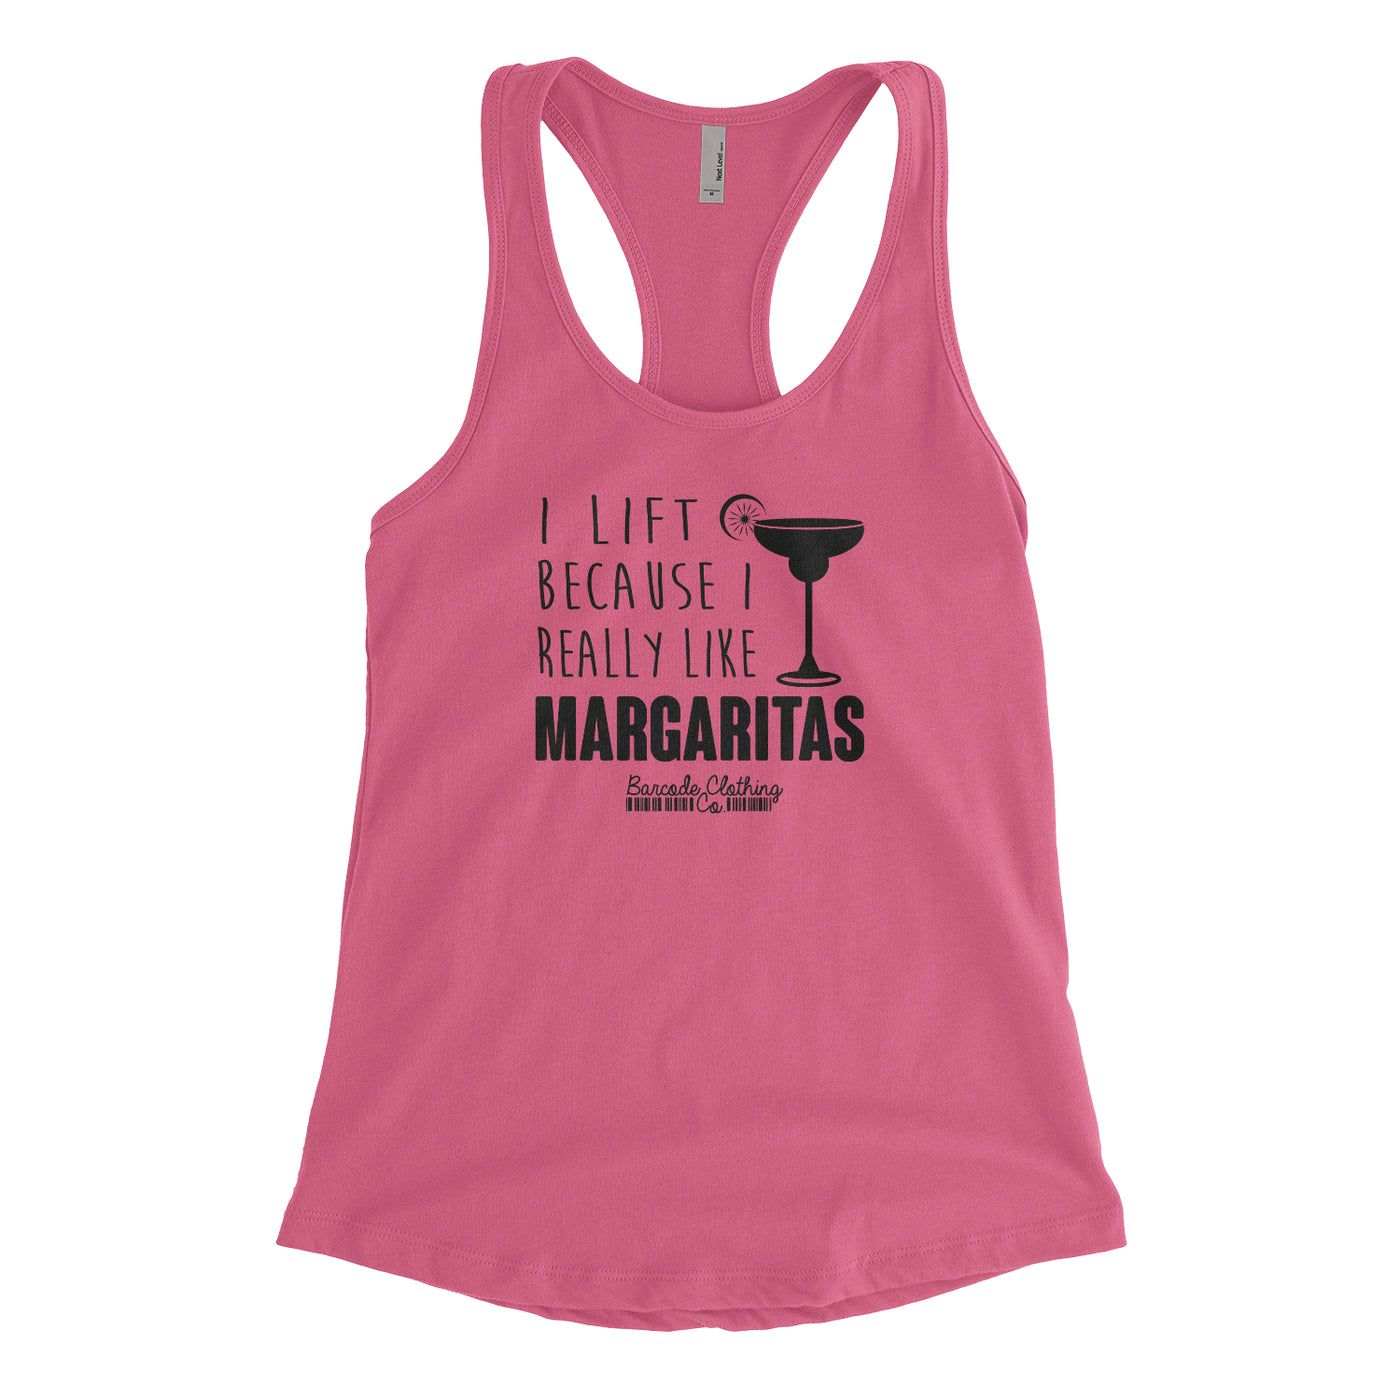 Lift Margaritas Blacked Out